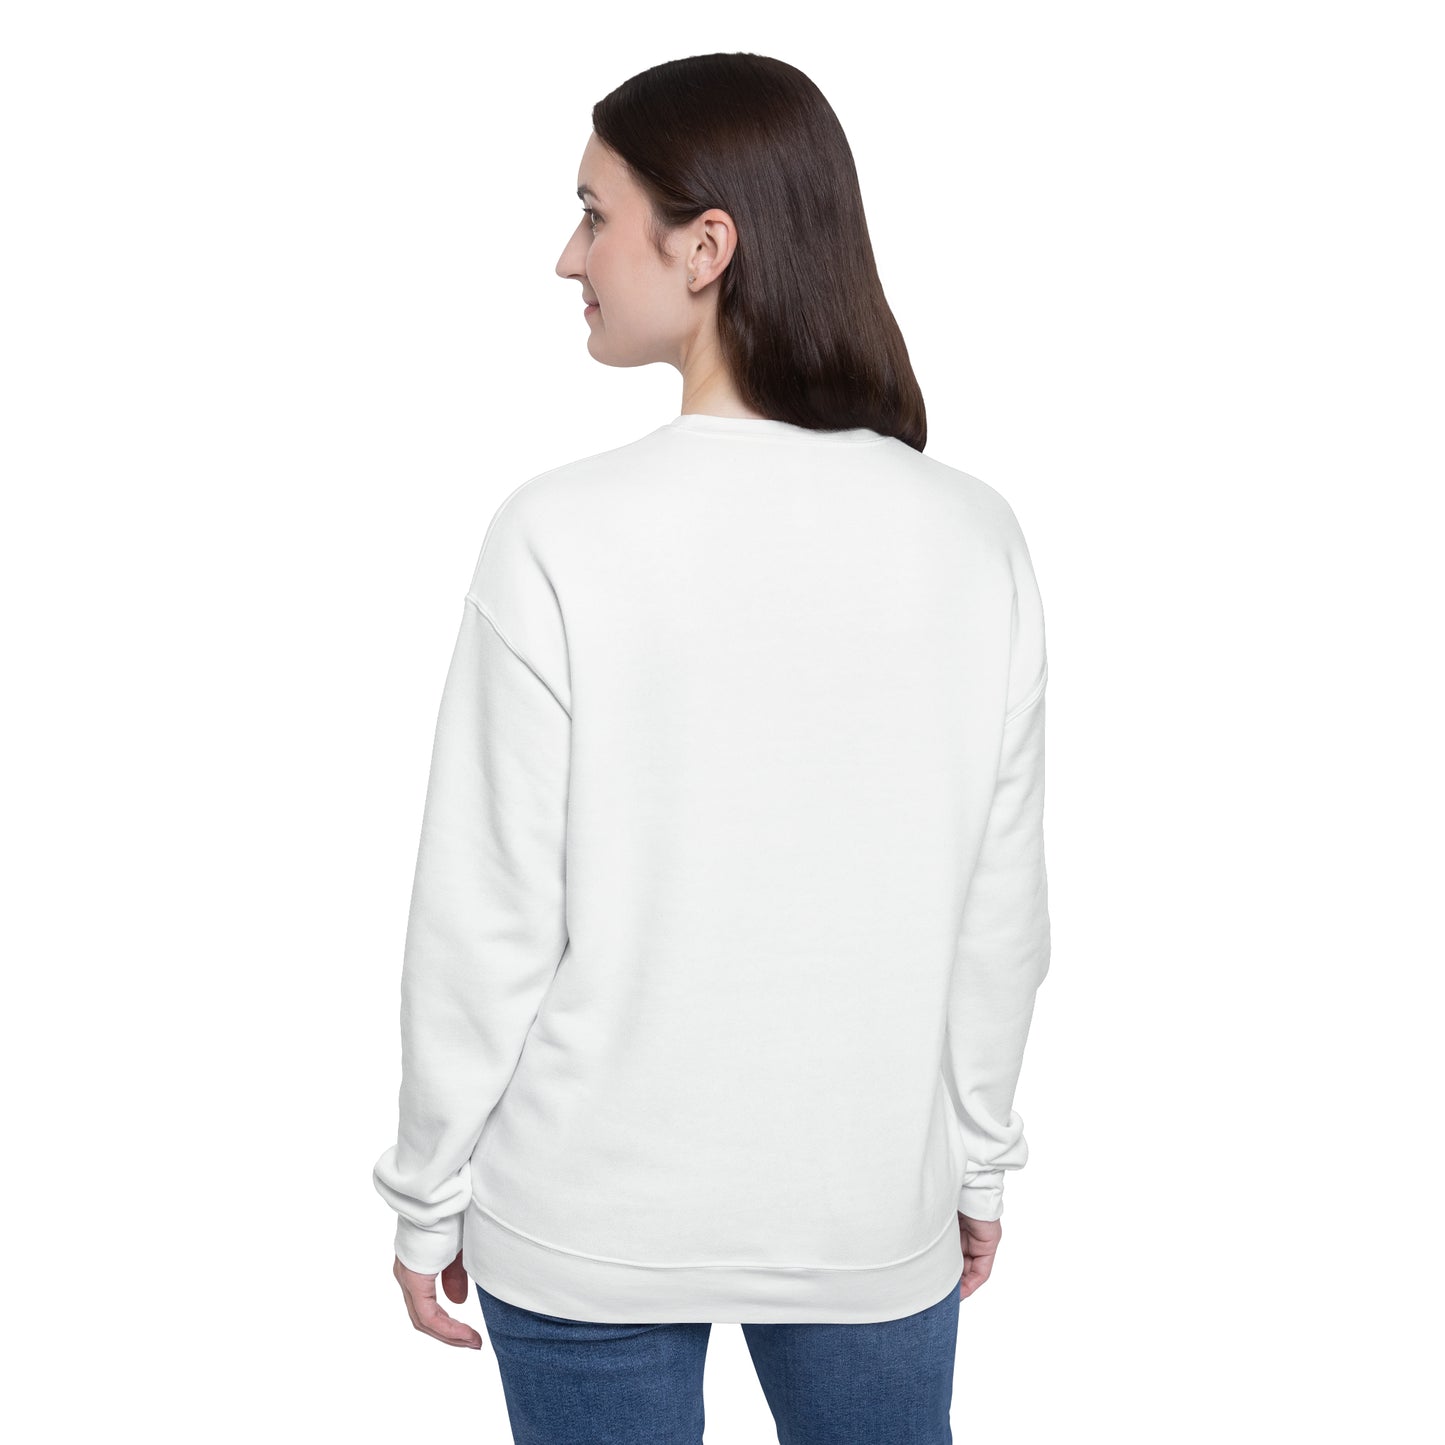 Happy Fall Y'All' Sweatshirt - Embrace Autumn in Comfort and Style with Country-Inspired Design - Unisex Drop Shoulder Sweatshirt